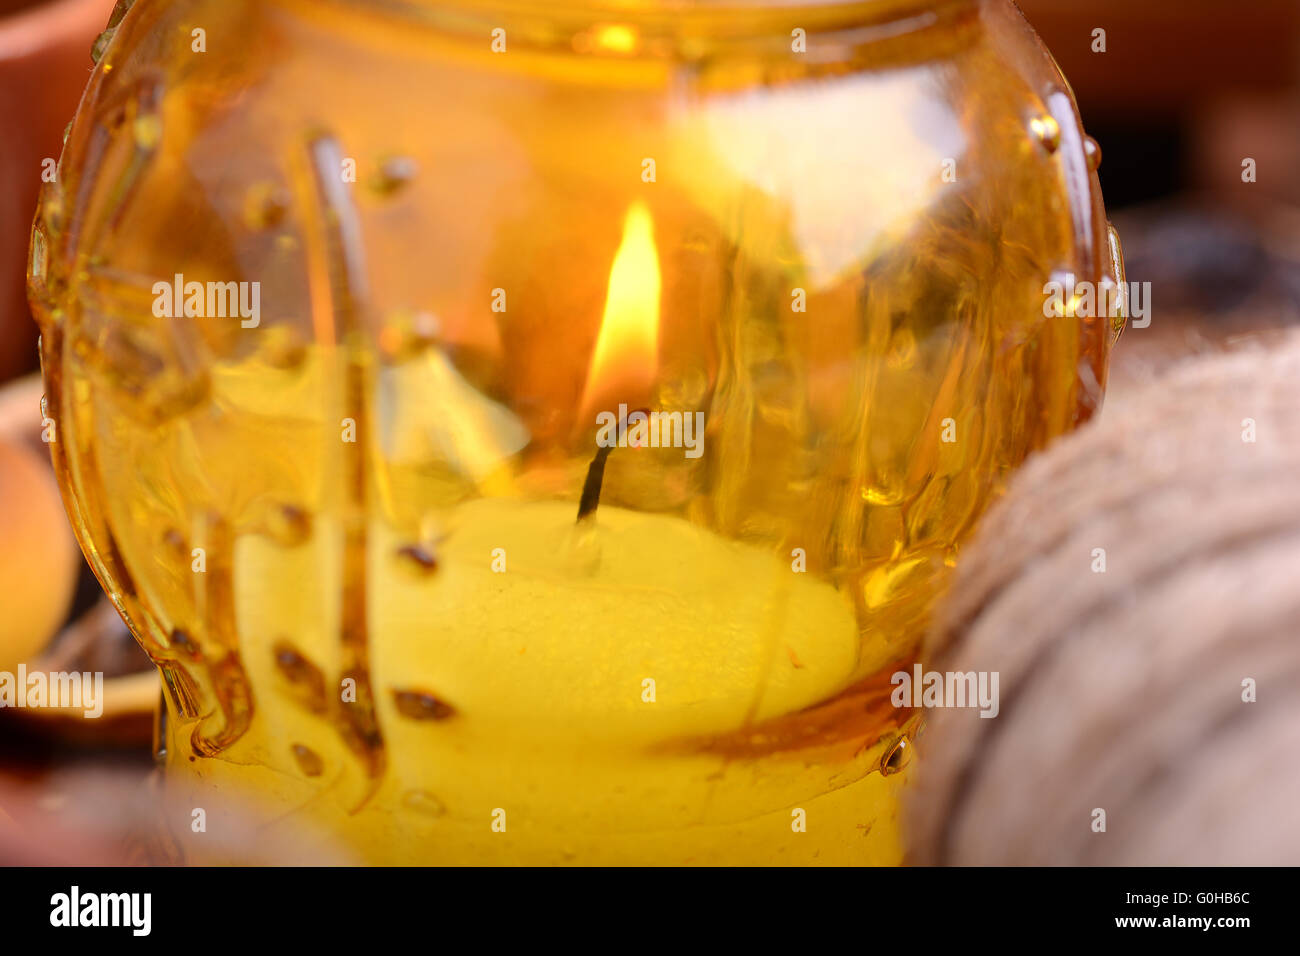 candles in glass burning romantic celecration concept wooden kitchen close up Stock Photo